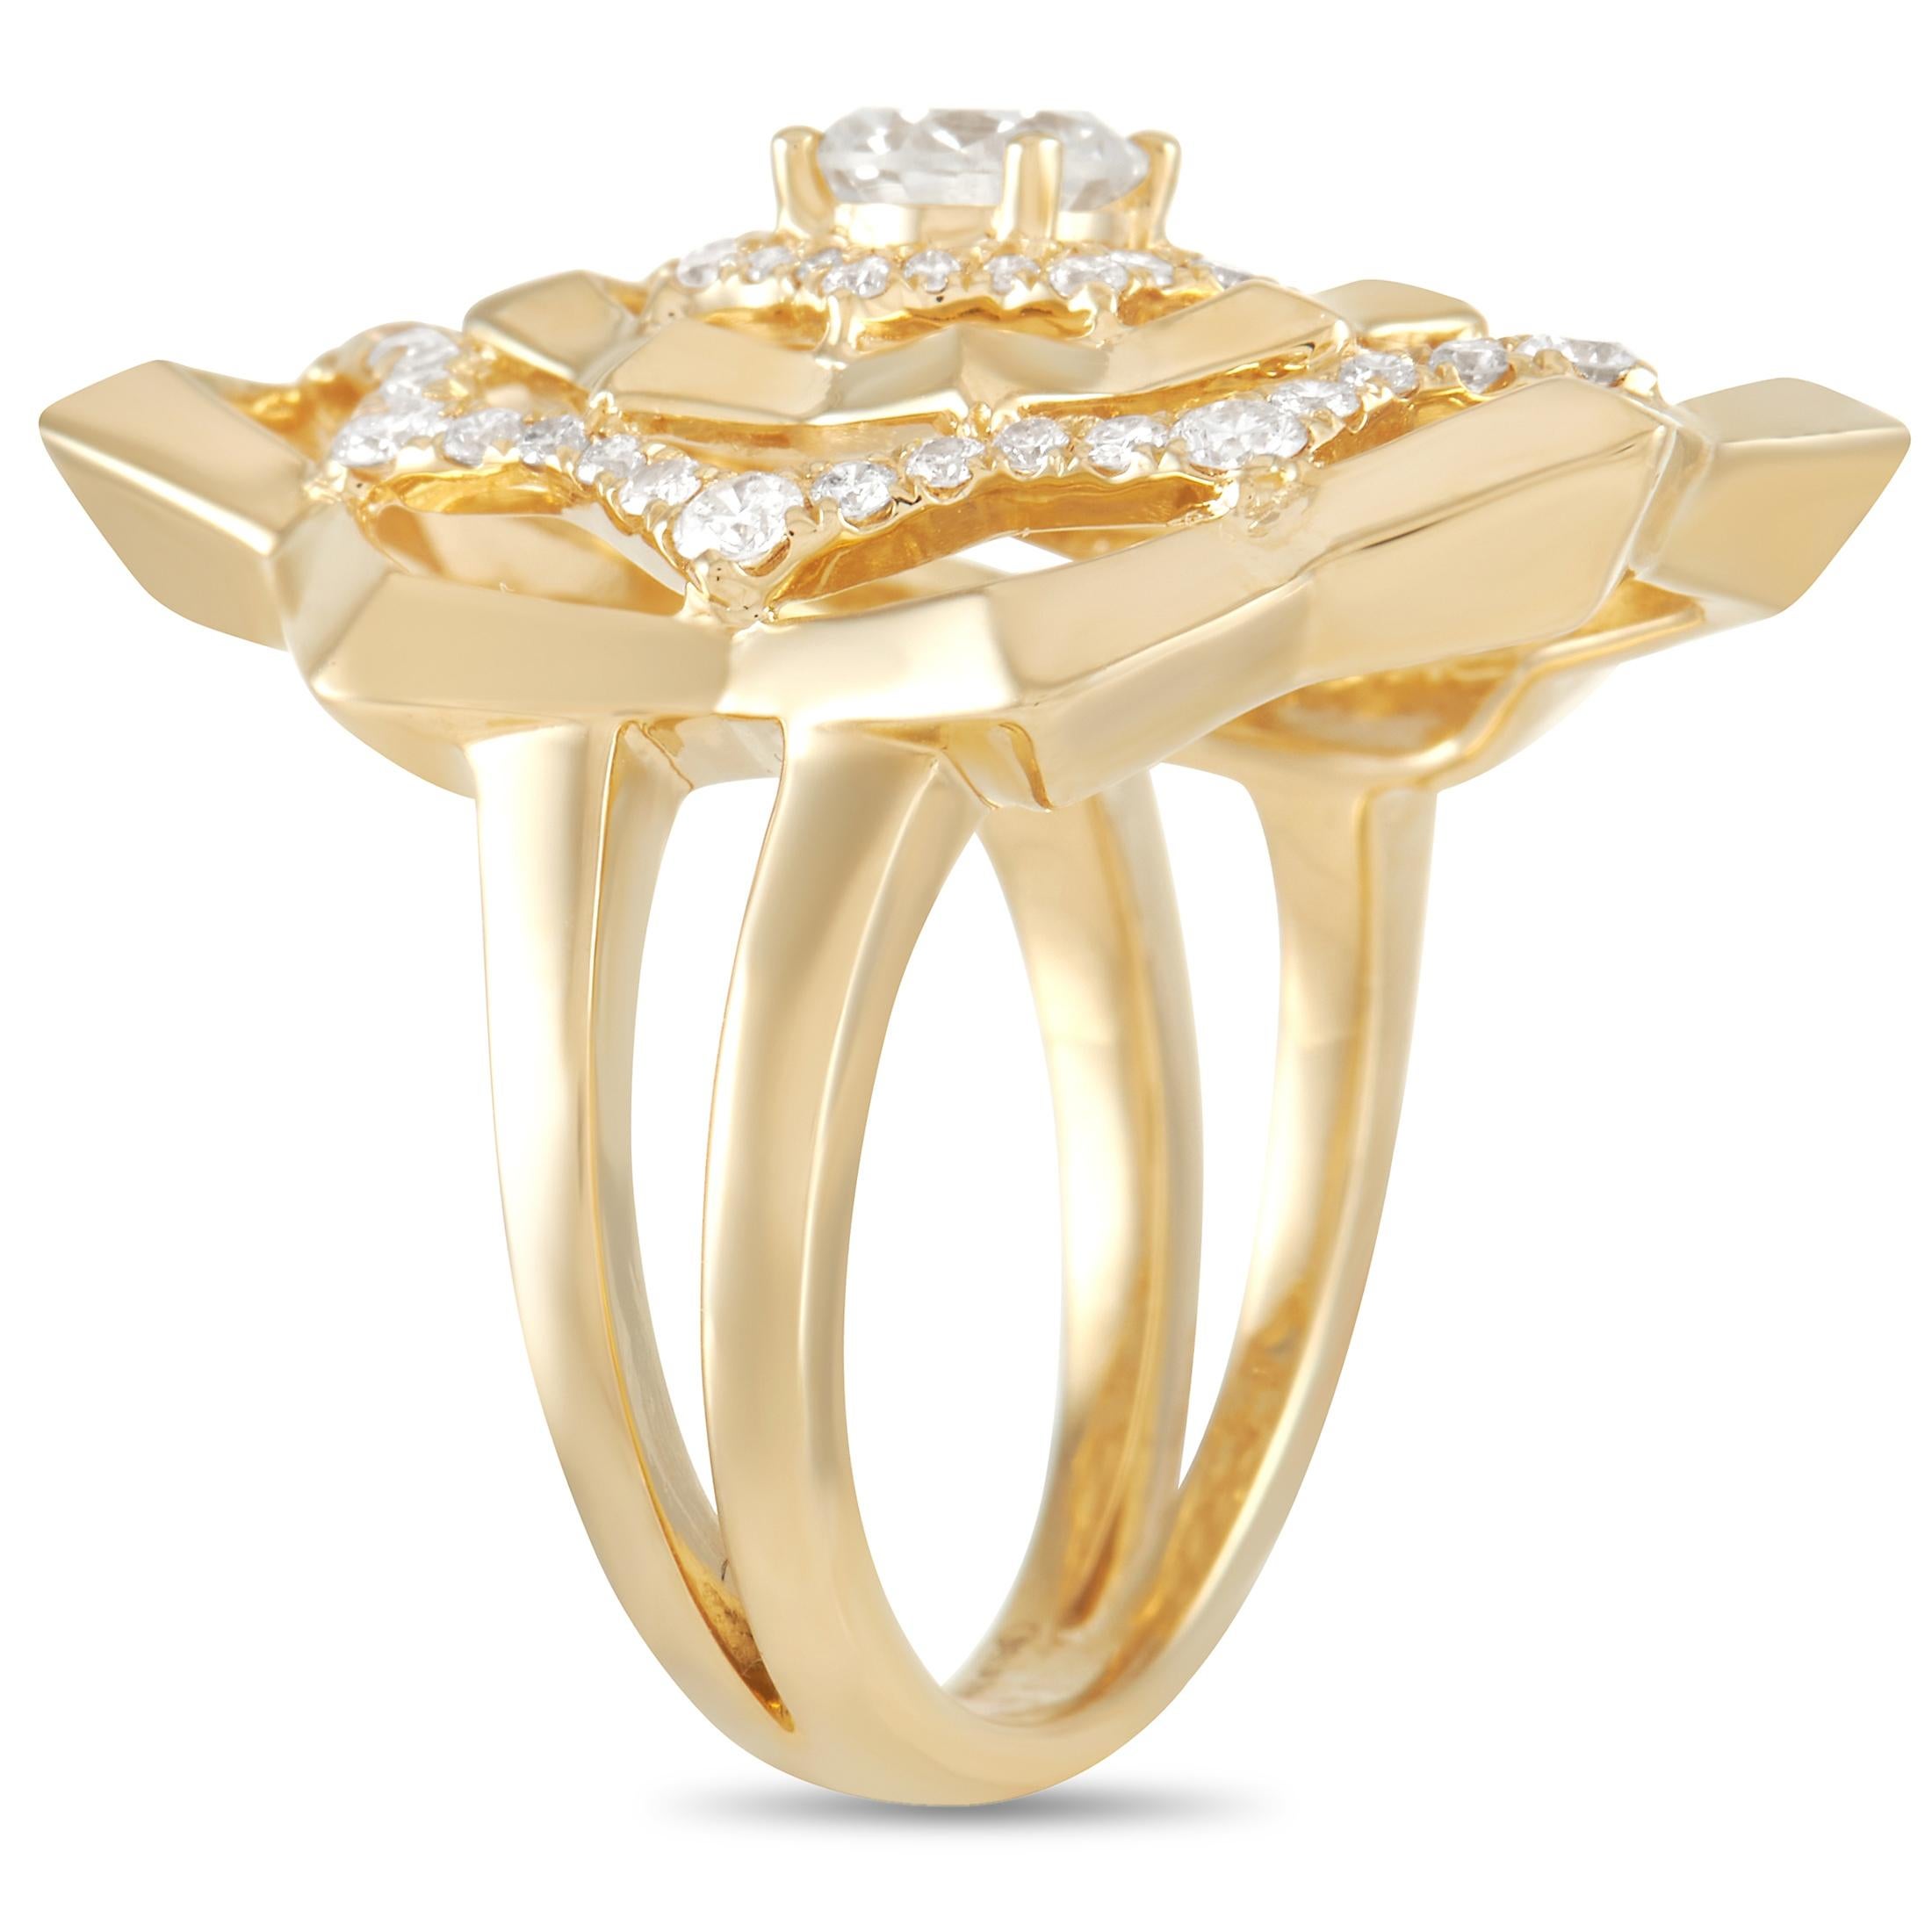 A unique design makes this piece an essential addition to any contemporary jewelry collection. Crafted from glistening 18K Yellow Gold, this ring’s web-like shape plays with negative space in an artistic and exceptional way. For added elegance,